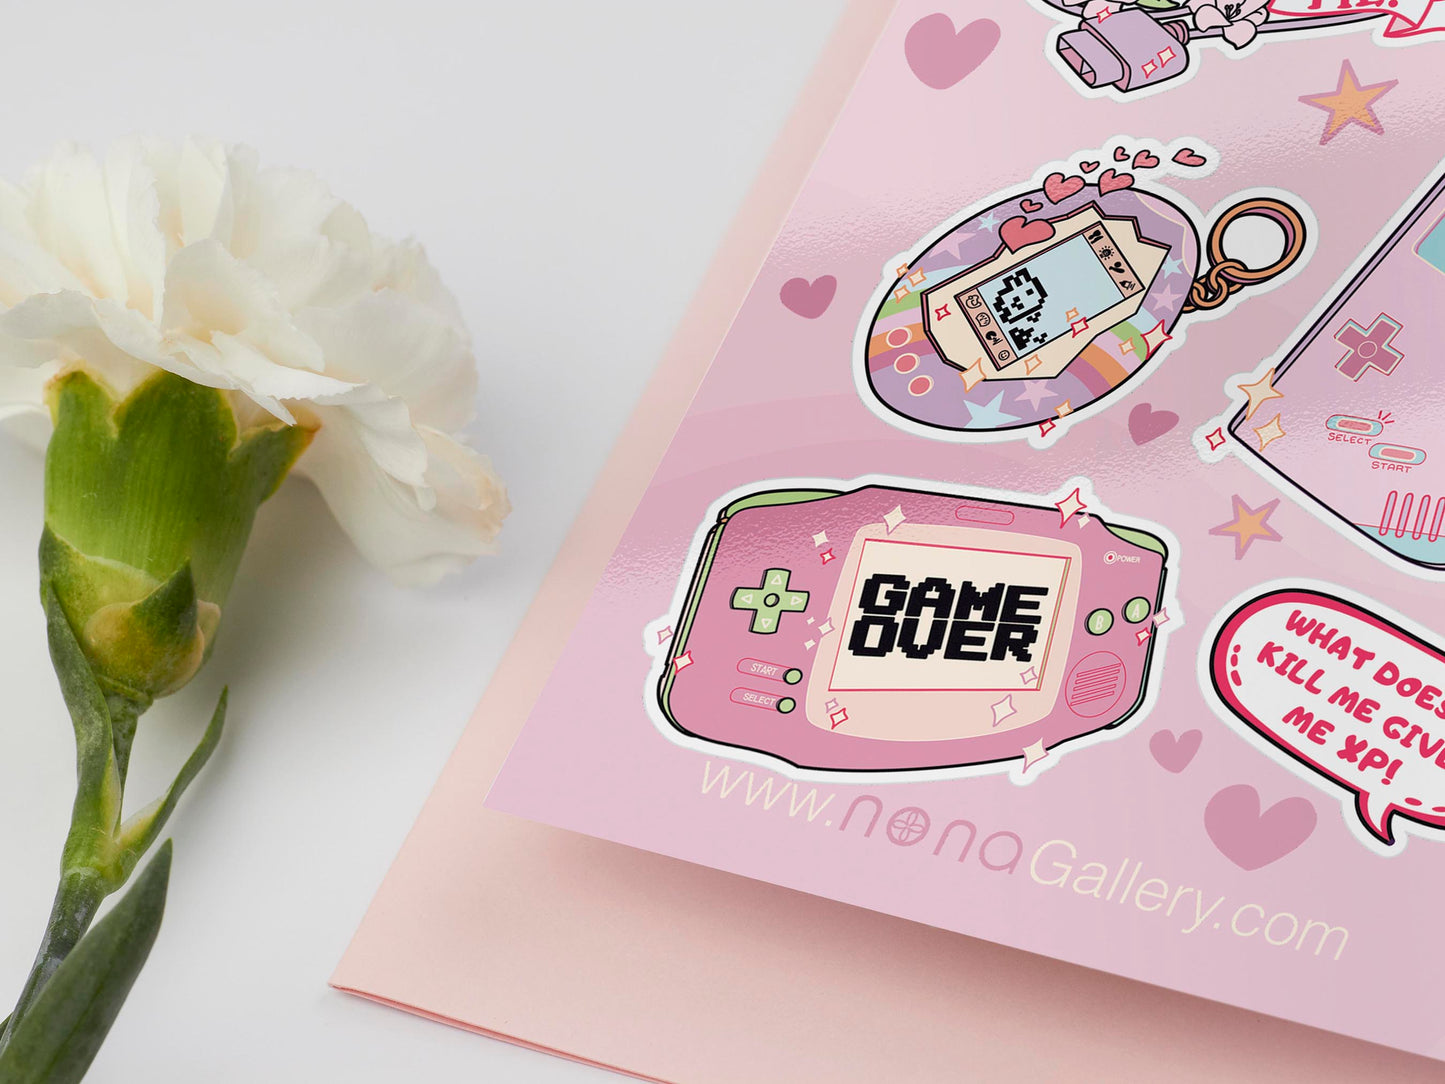 Large sticker sheet of digital illustration cartoons of various cute retro gaming consoles and technology, such as Tamagotchis, tabletop dice, nintendo gameboy, nes, handheld consoles, controllers, quotes and other items.